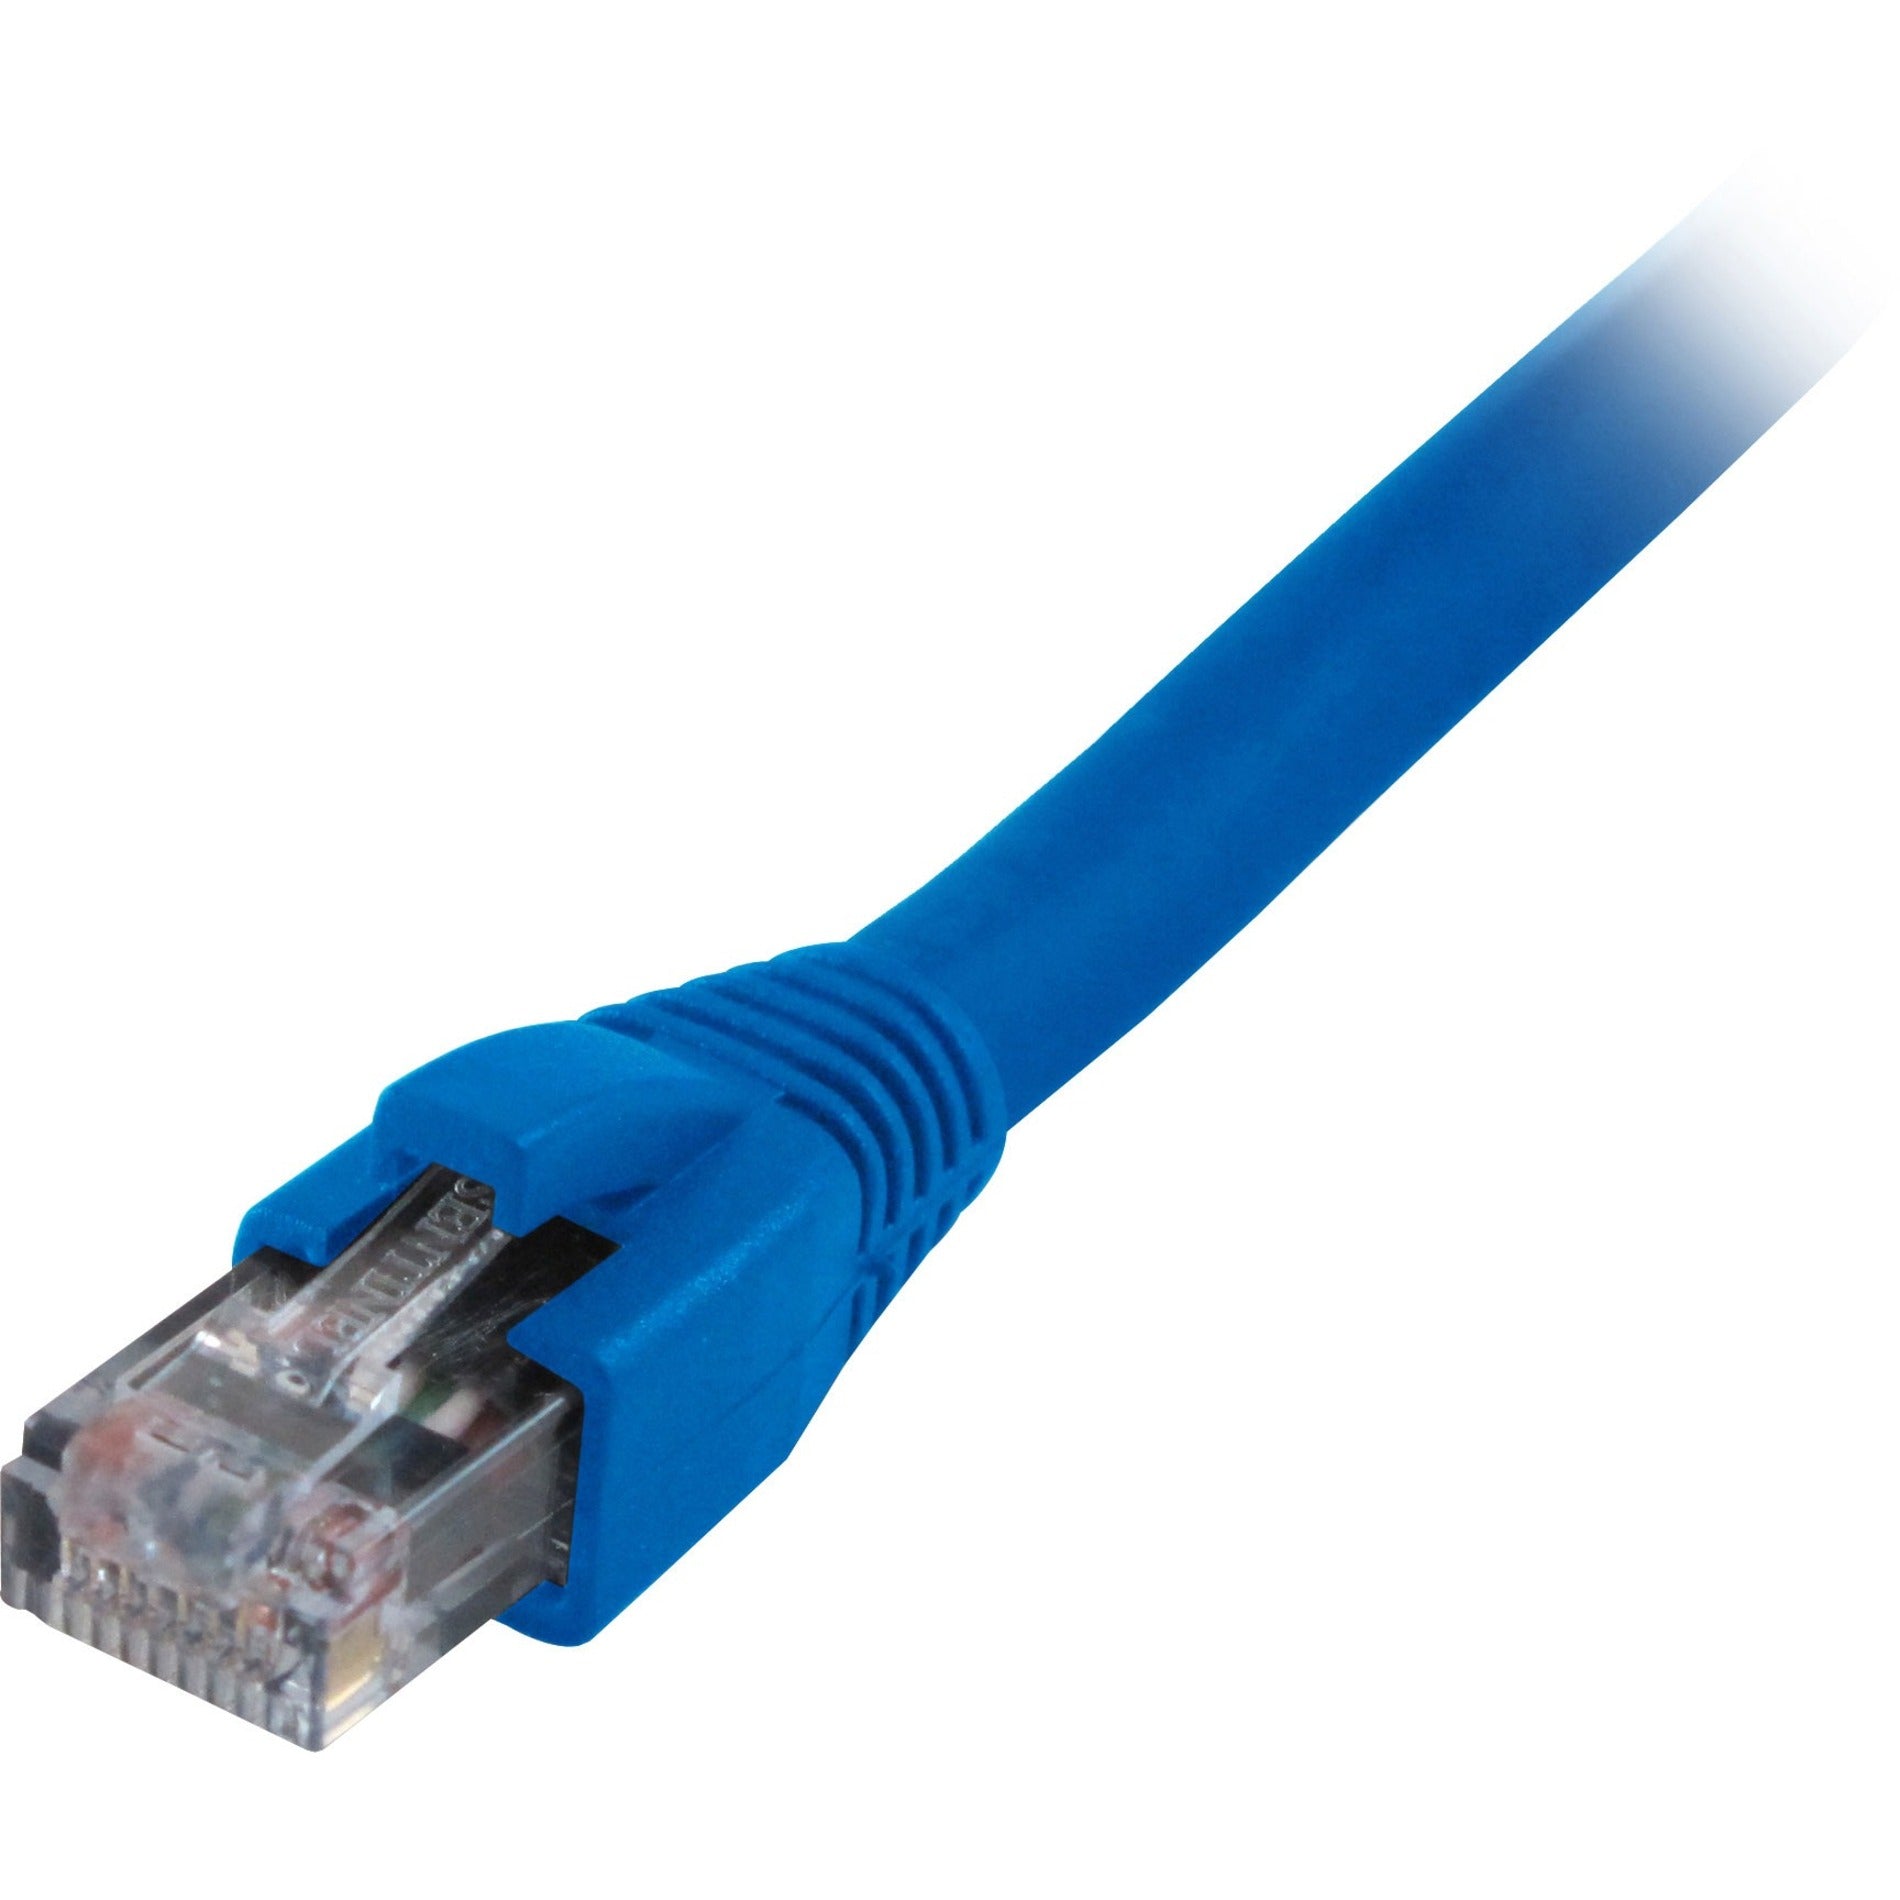 Comprehensive CAT6A-3BLU CAT6A Shielded Patch Cable Blue 3ft., 10 Gbit/s Data Transfer Rate, Snagless Boot, Lifetime Warranty